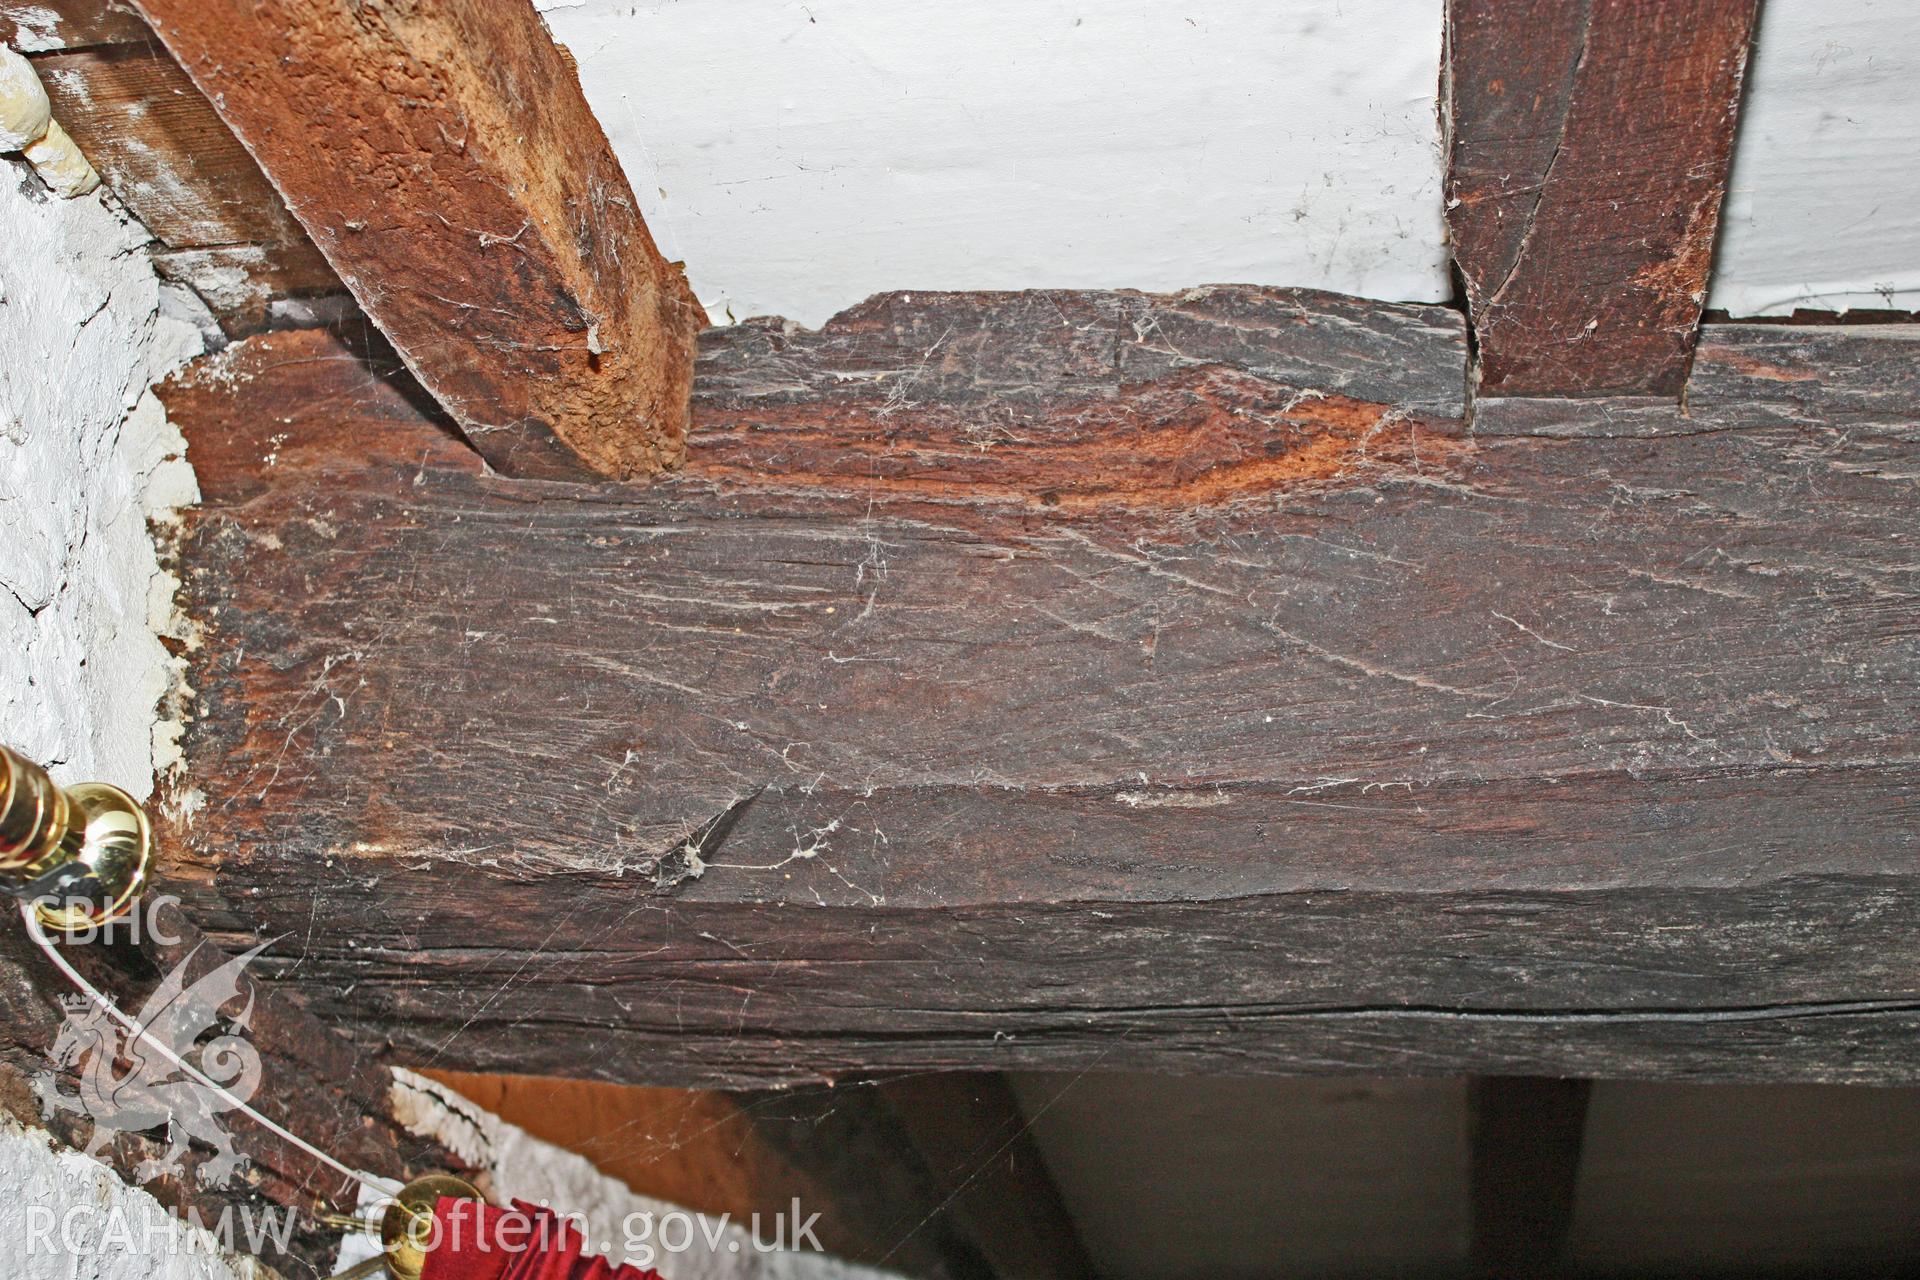 Glantywi House bakehouse, interior view, ceiling beam detail.